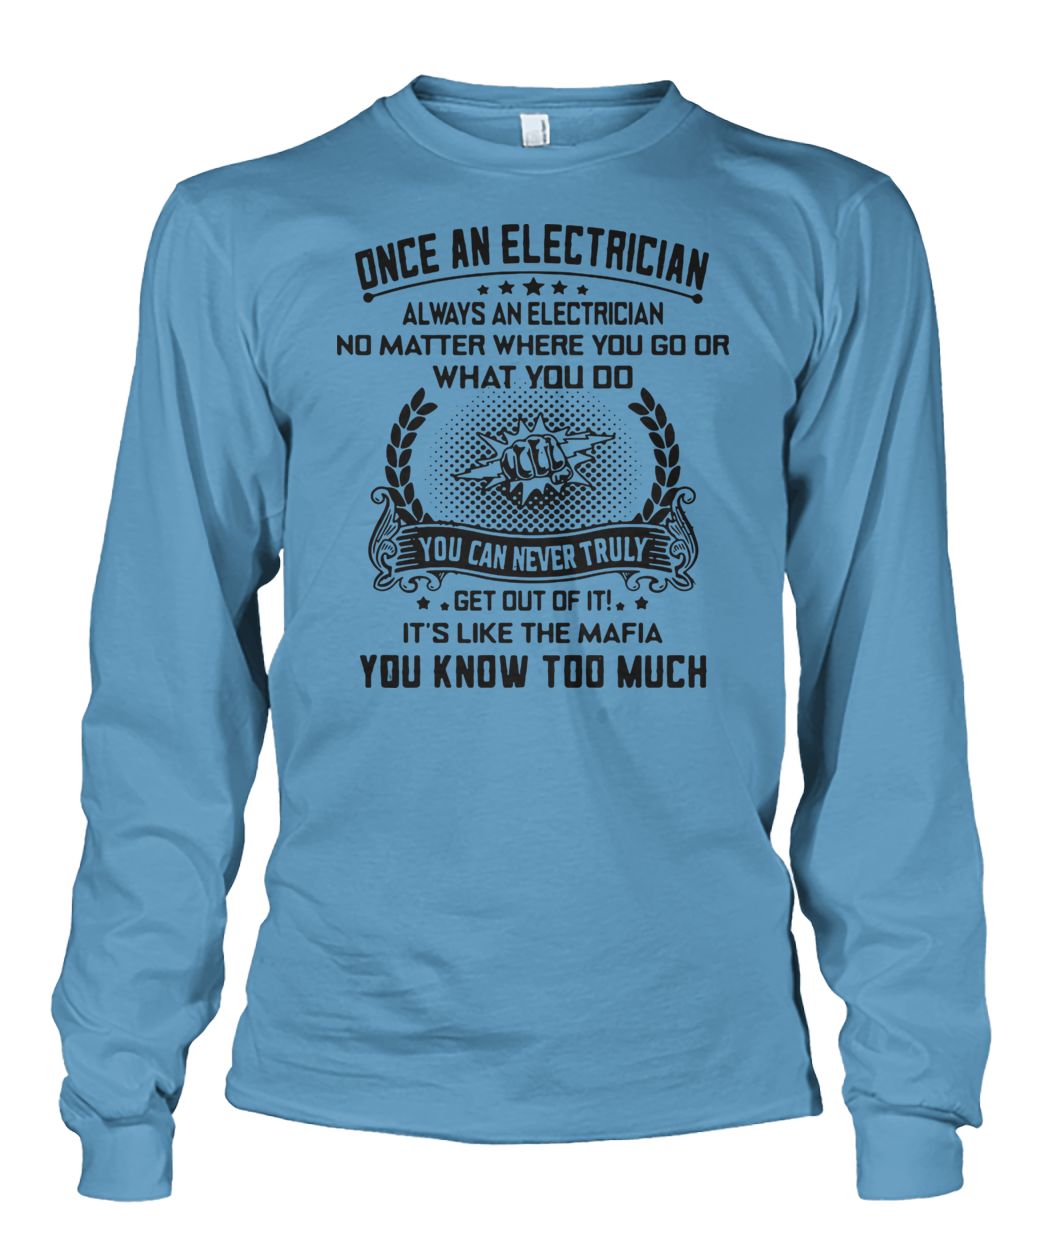 Once an electrician always an electrician no matter where you go unisex long sleeve